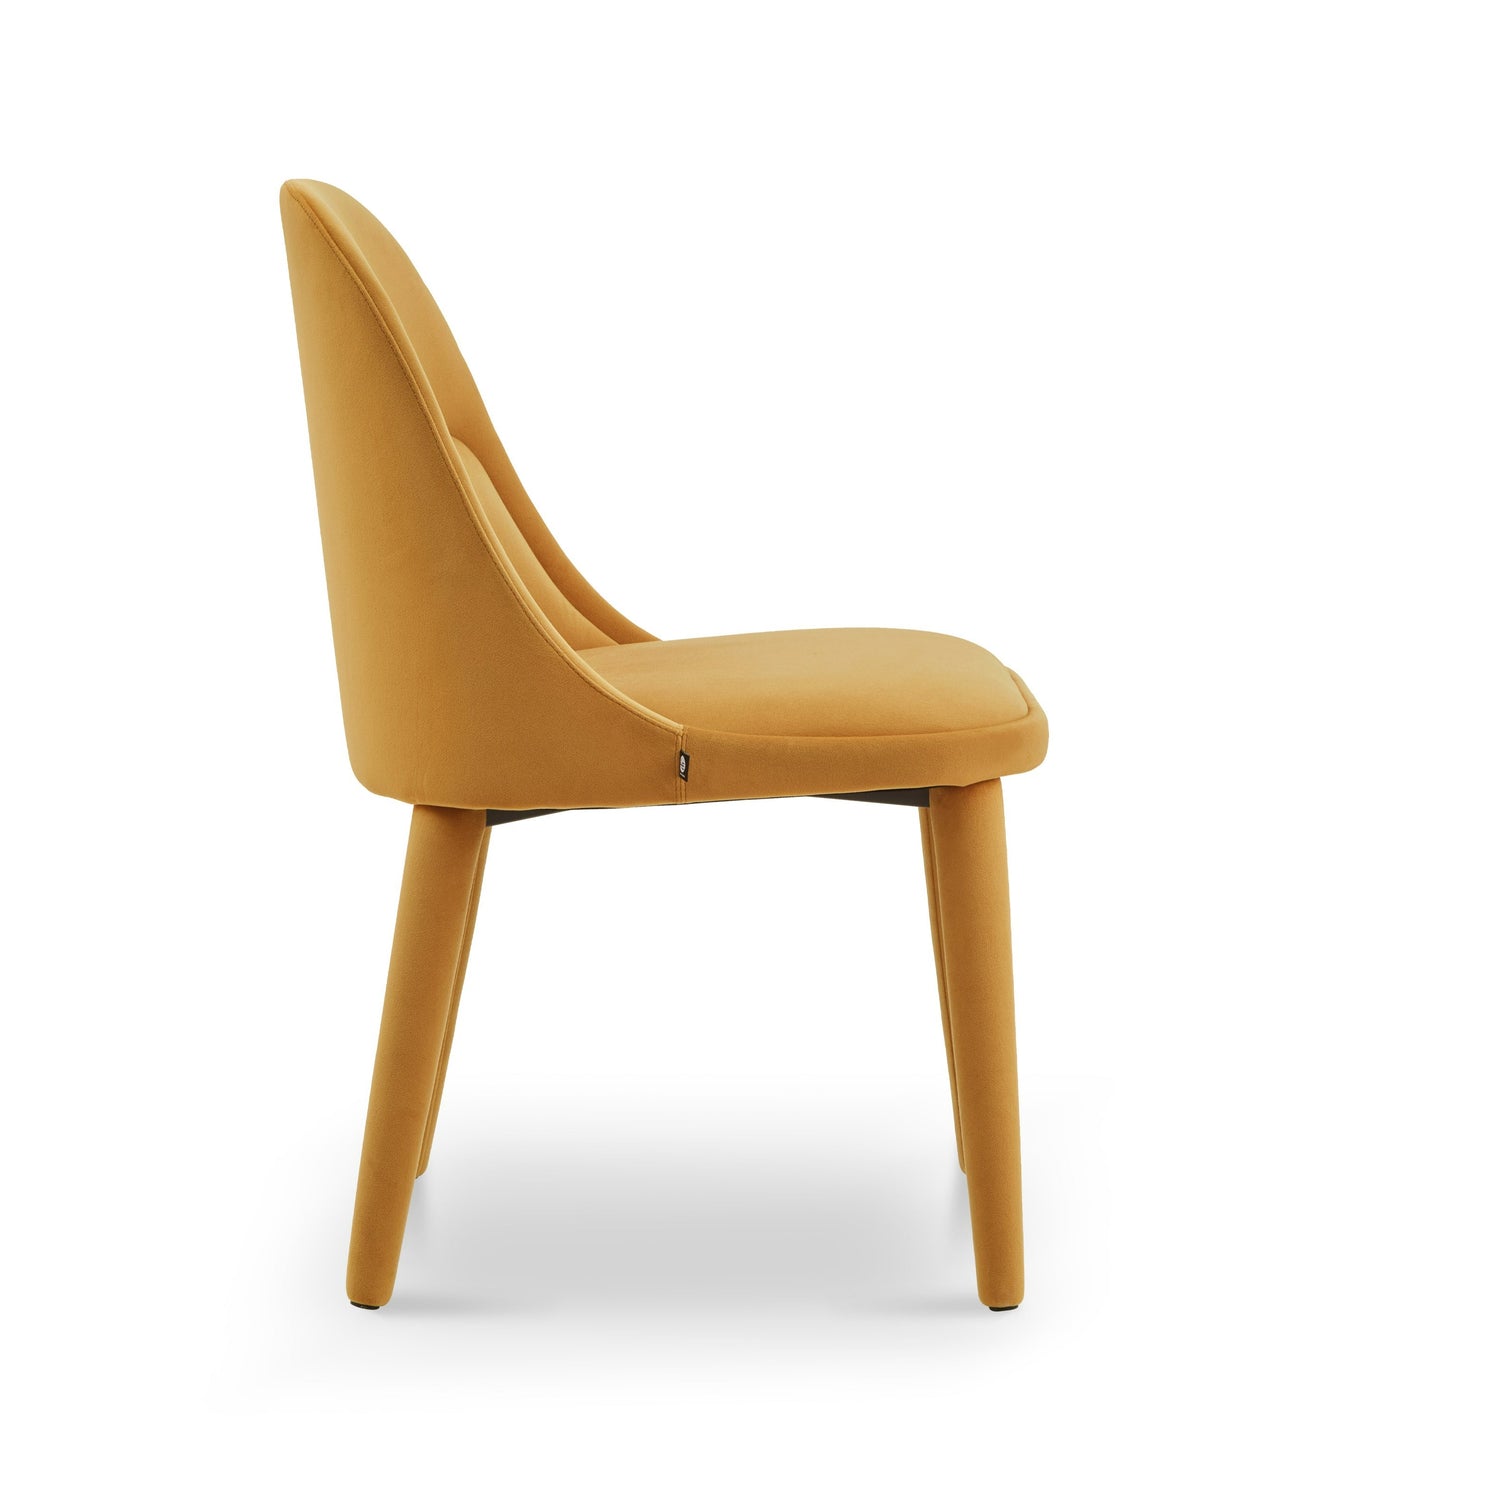  LiangAndEimil-Liang & Eimil Diva Dining Chair in Kaster II Mustard-Yellow 037 